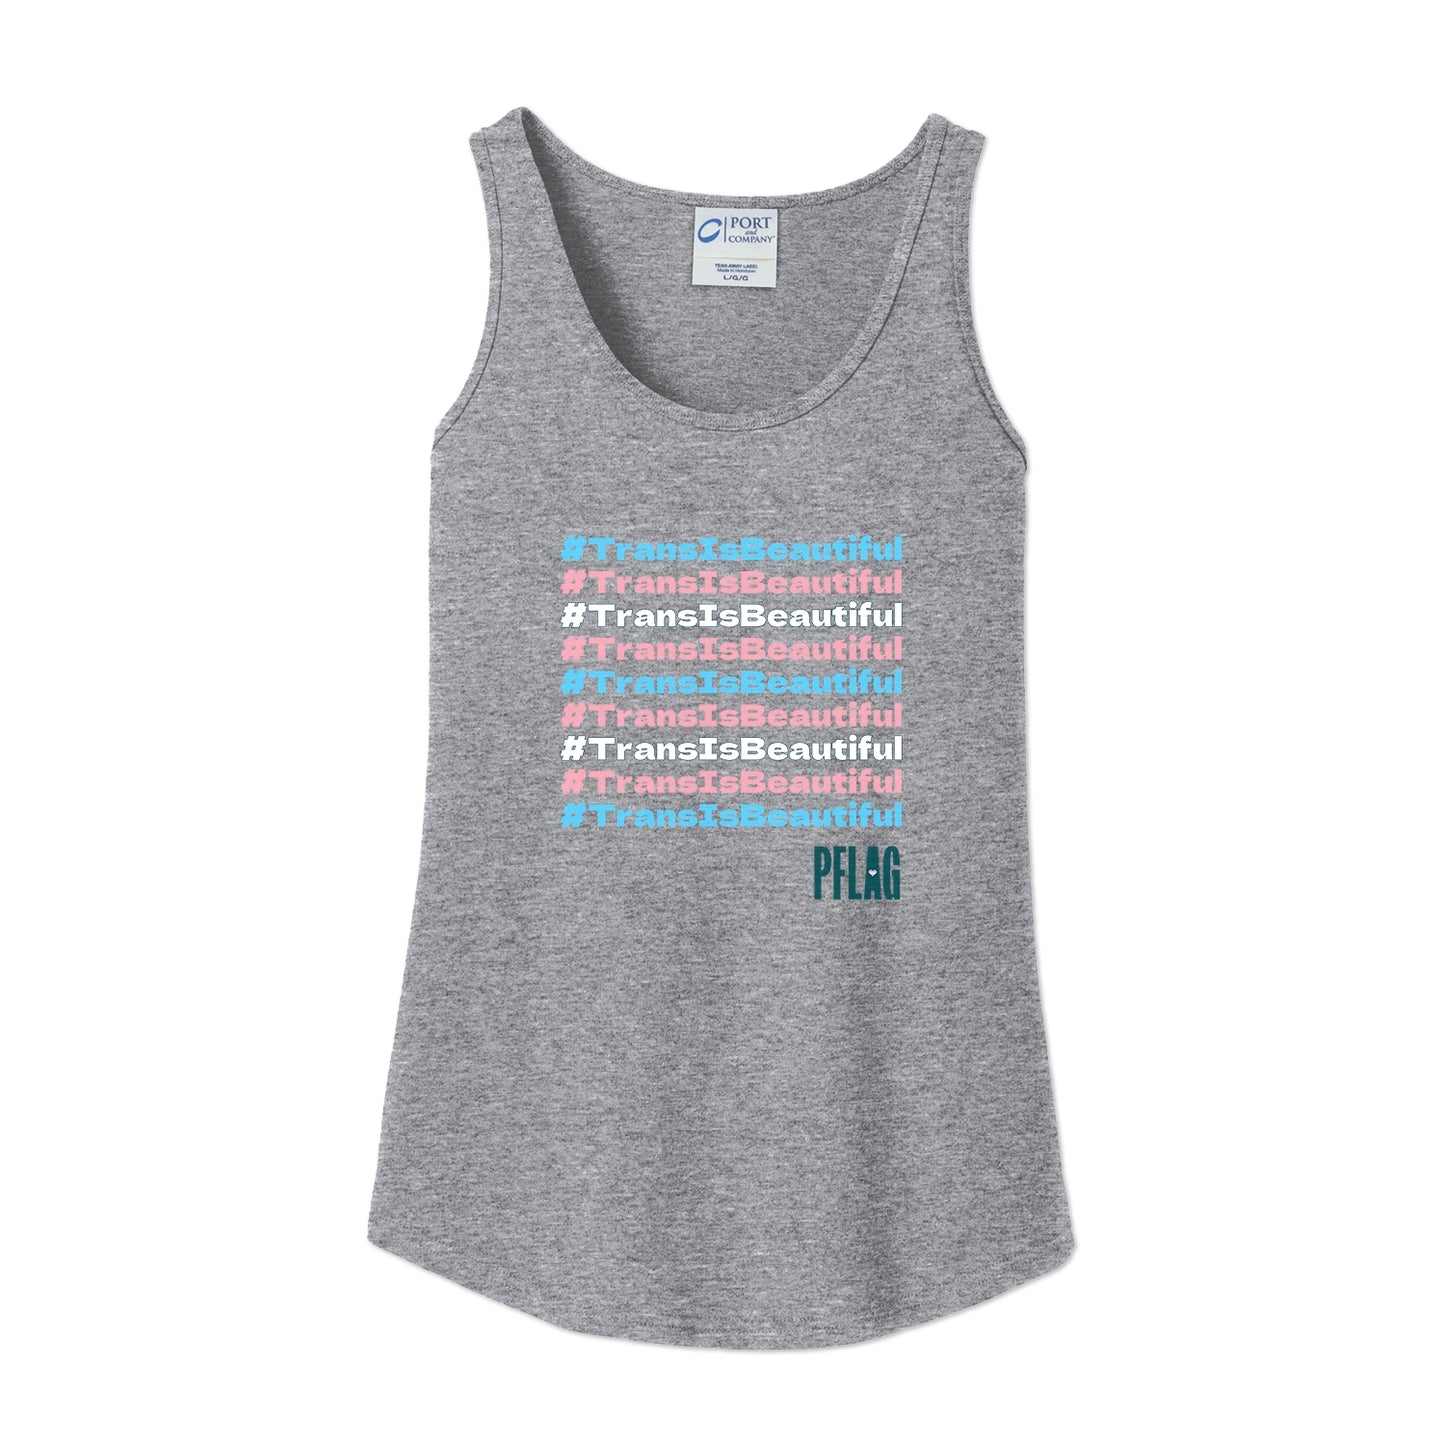 #TransIsBeautiful - TransPride Colors - Fitted-Cut Tank Top